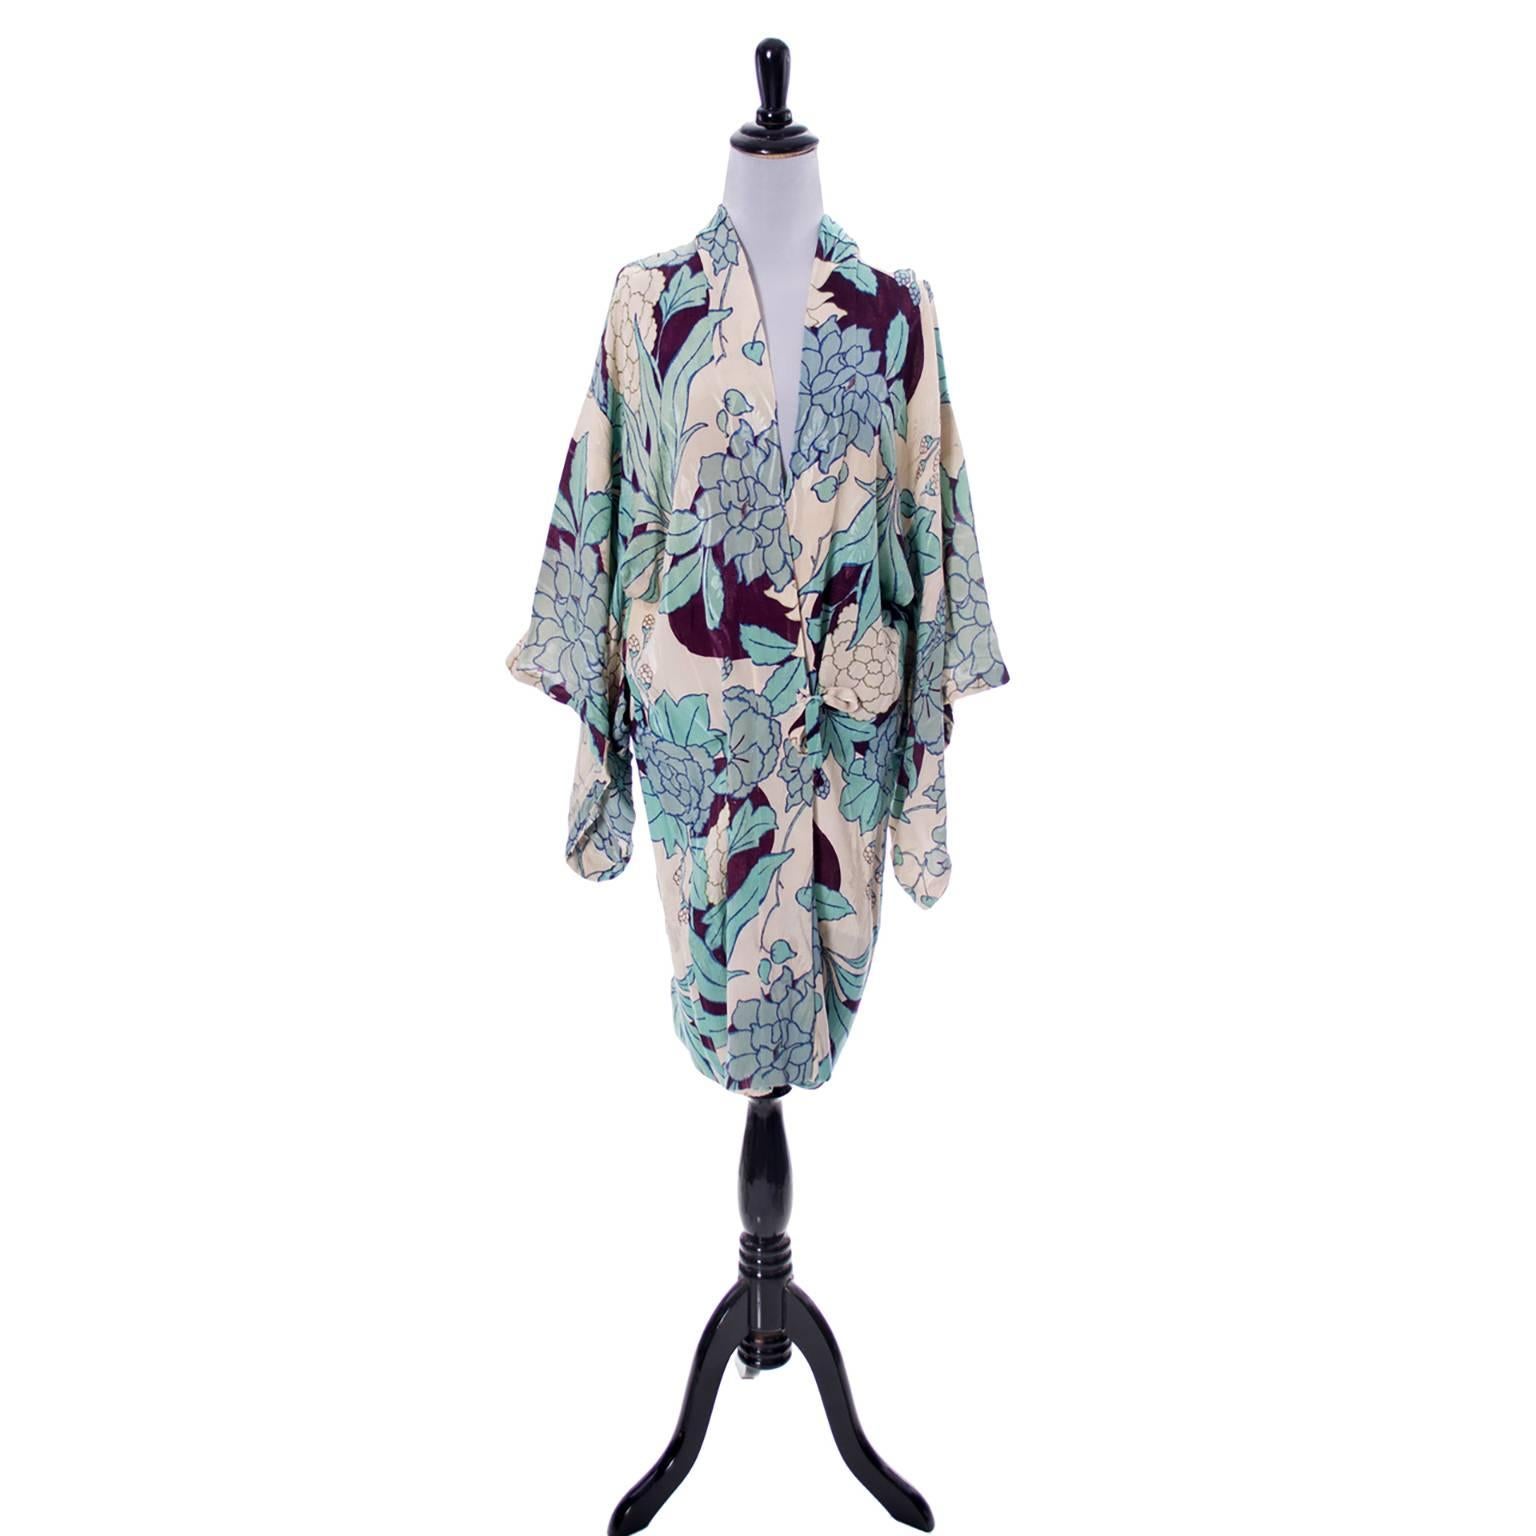 This is a really beautiful late 1920s or early 1930s Japanese fine silk vintage Kimono floral robe with self ties. The floral pattern is gorgeous in shades of blue and deep eggplant.  This measures  37